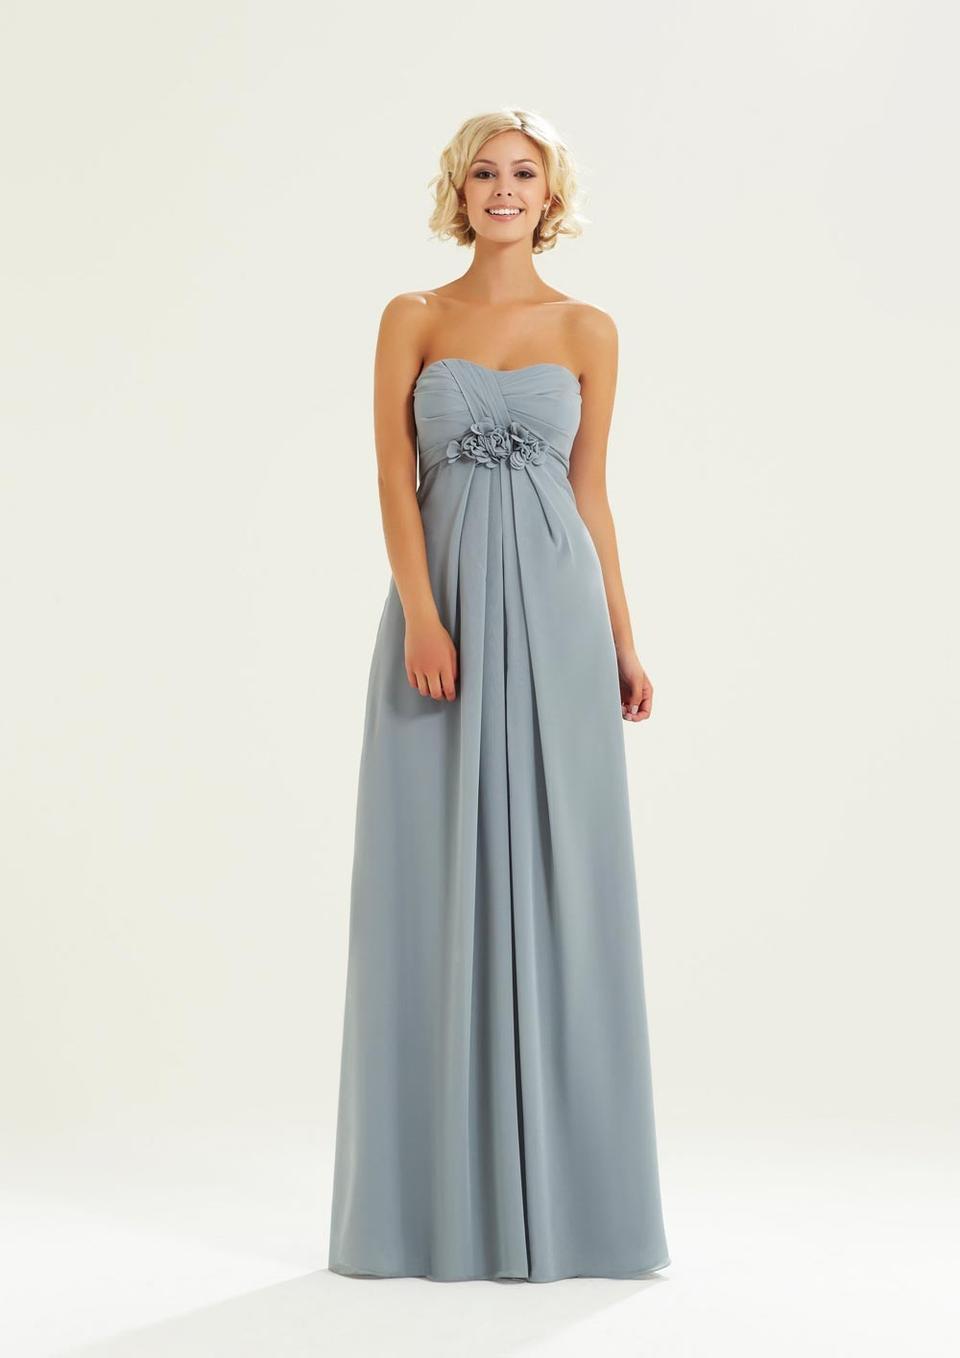 Grey Bridesmaid Dresses - hitched.co.uk - hitched.co.uk